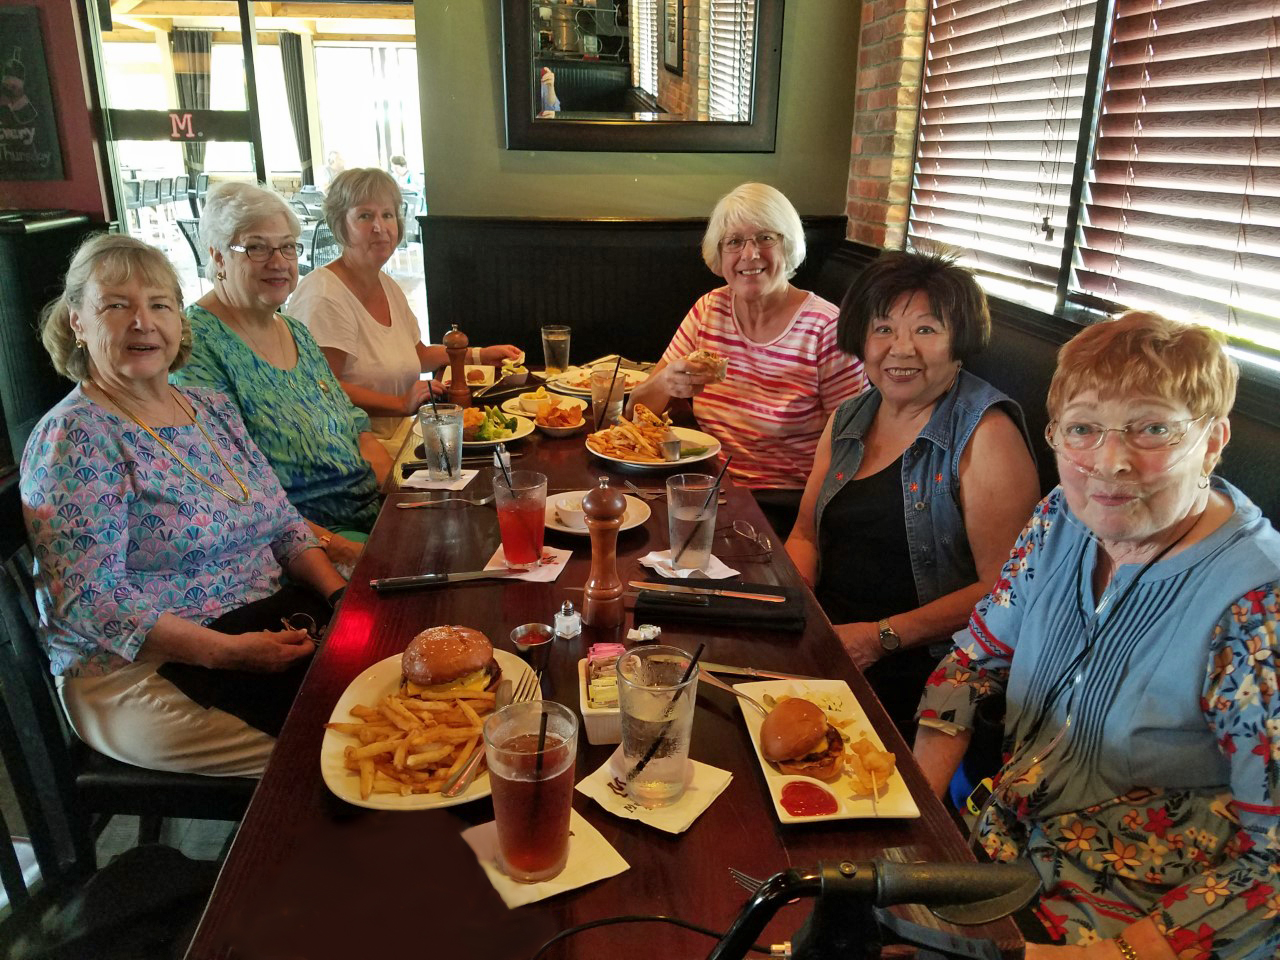 Mom lunching with friends, Apr 2018